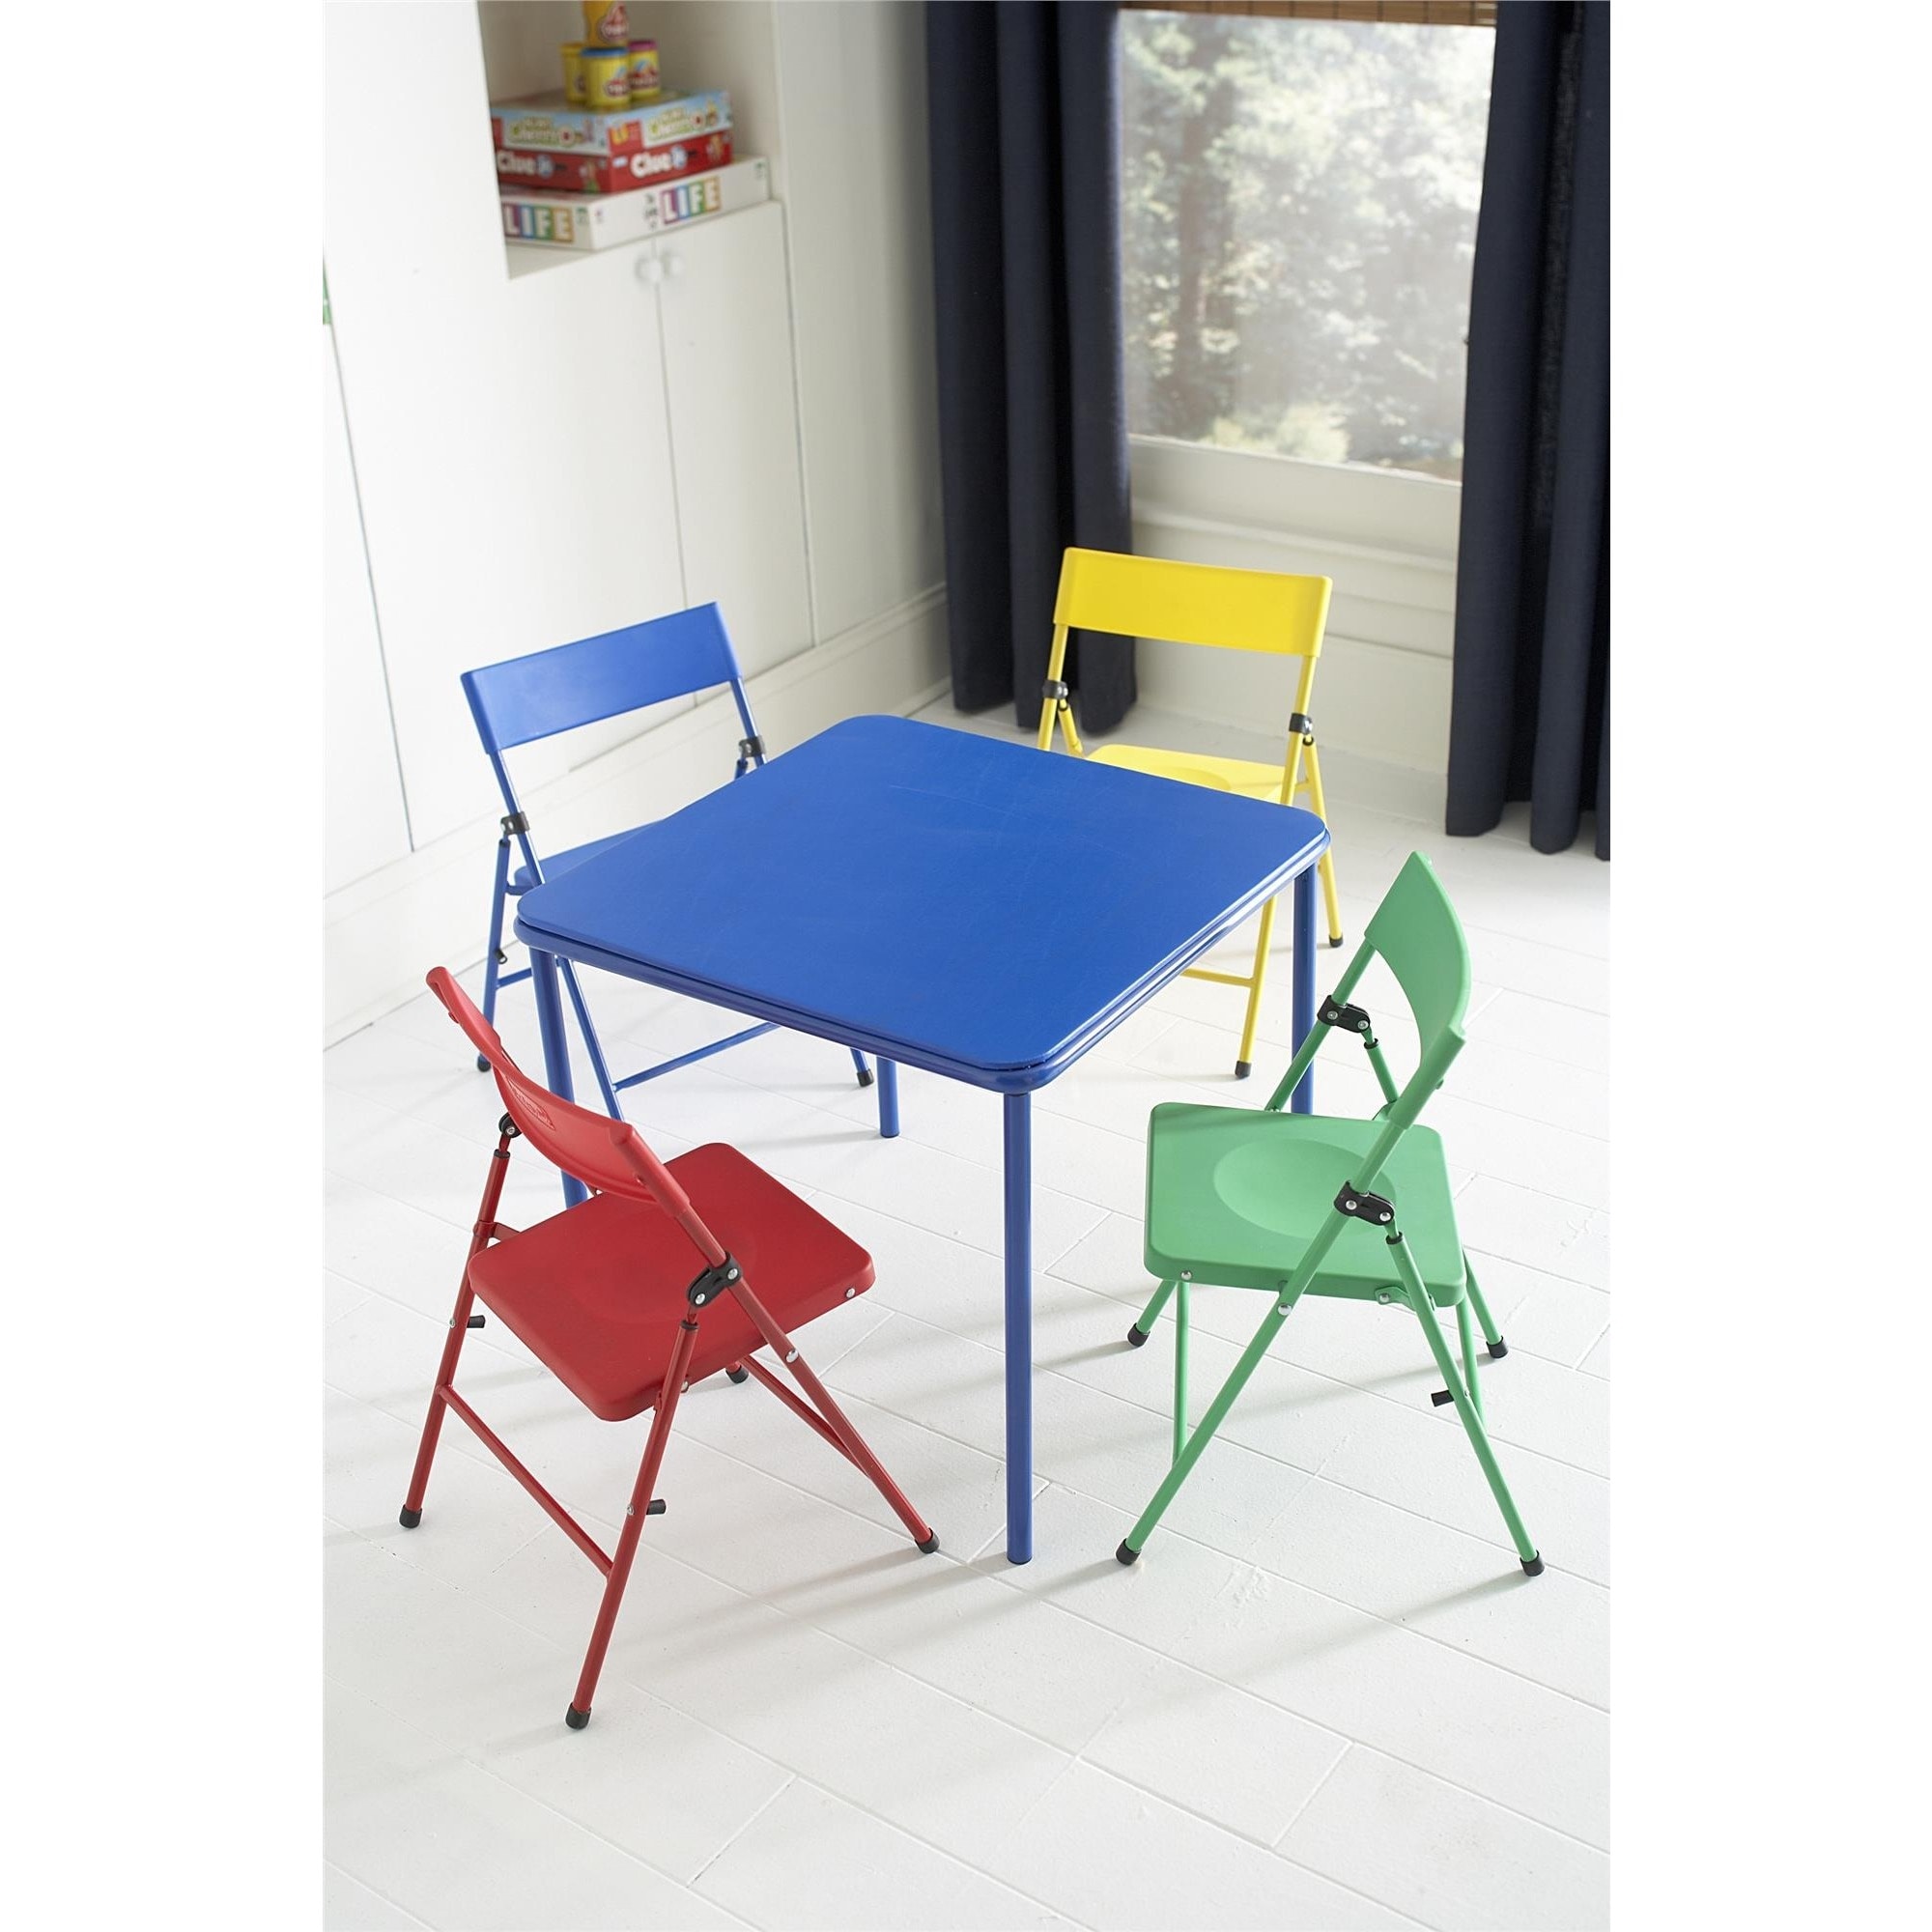 collapsible children's table and chairs